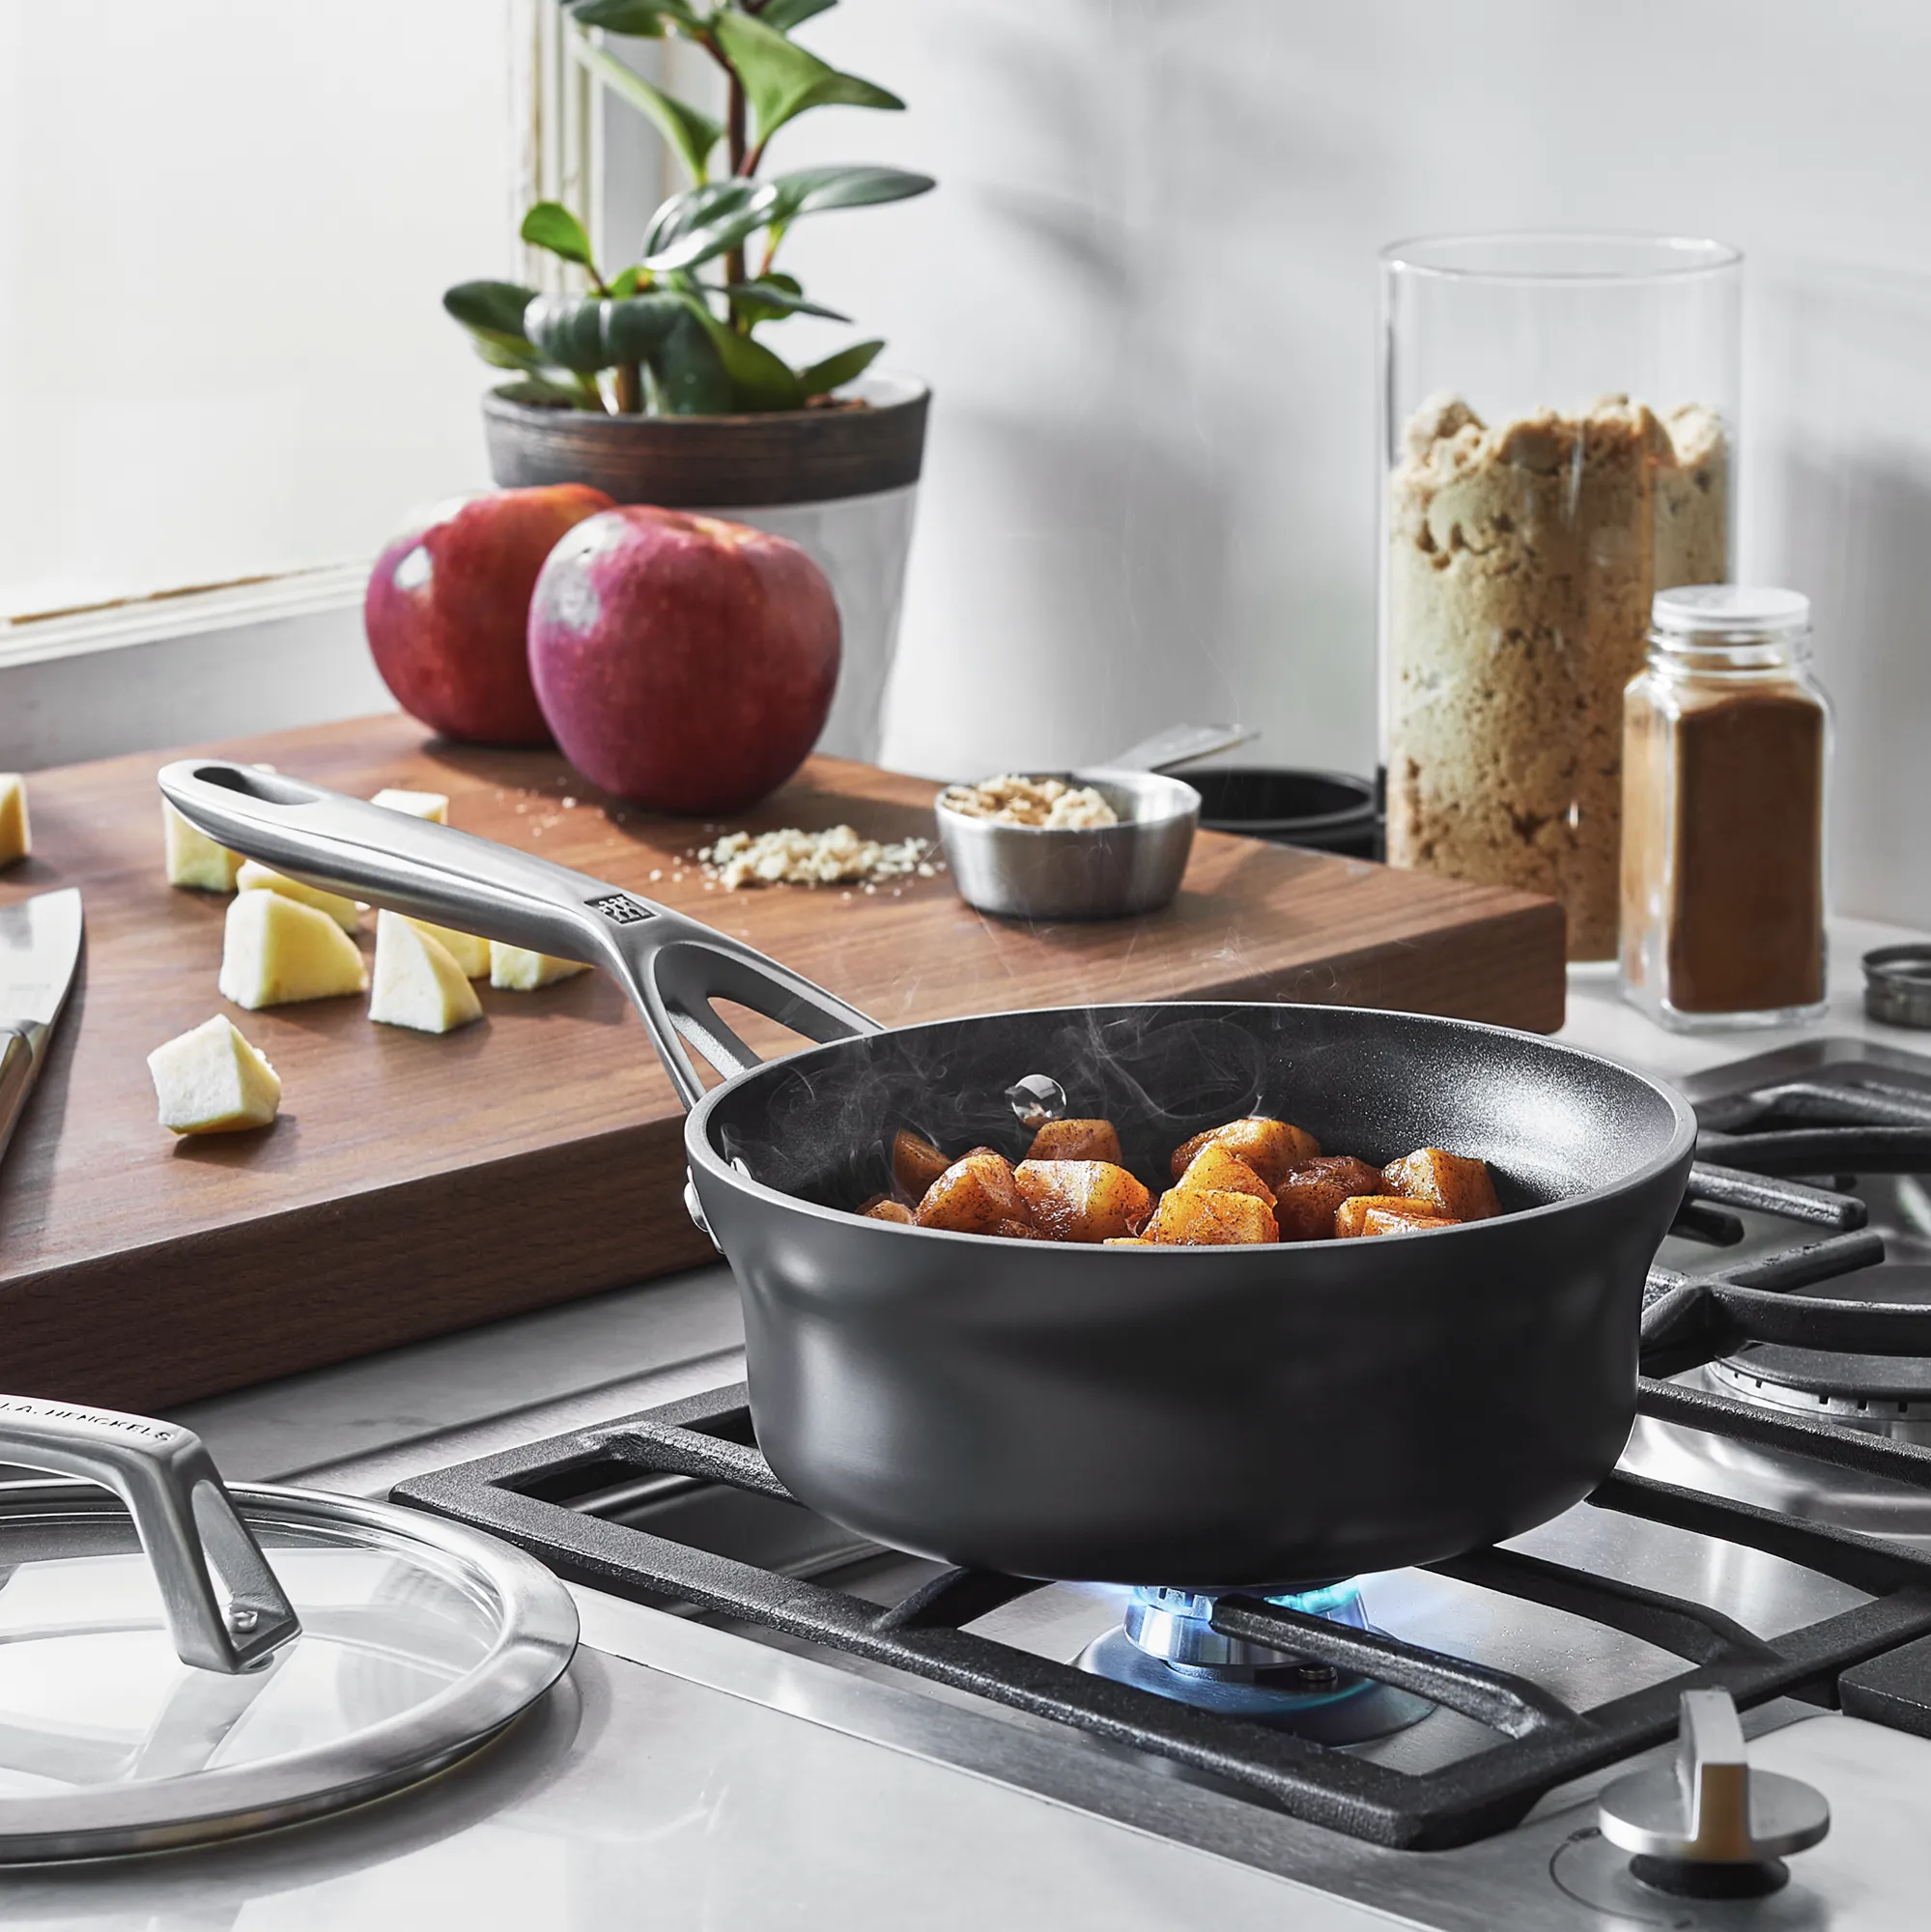 https://www.homethreads.com/files/zwilling/1021534-zwilling-motion-hard-anodized-15-qt-aluminum-nonstick-sauce-pan-with-lid-2.webp